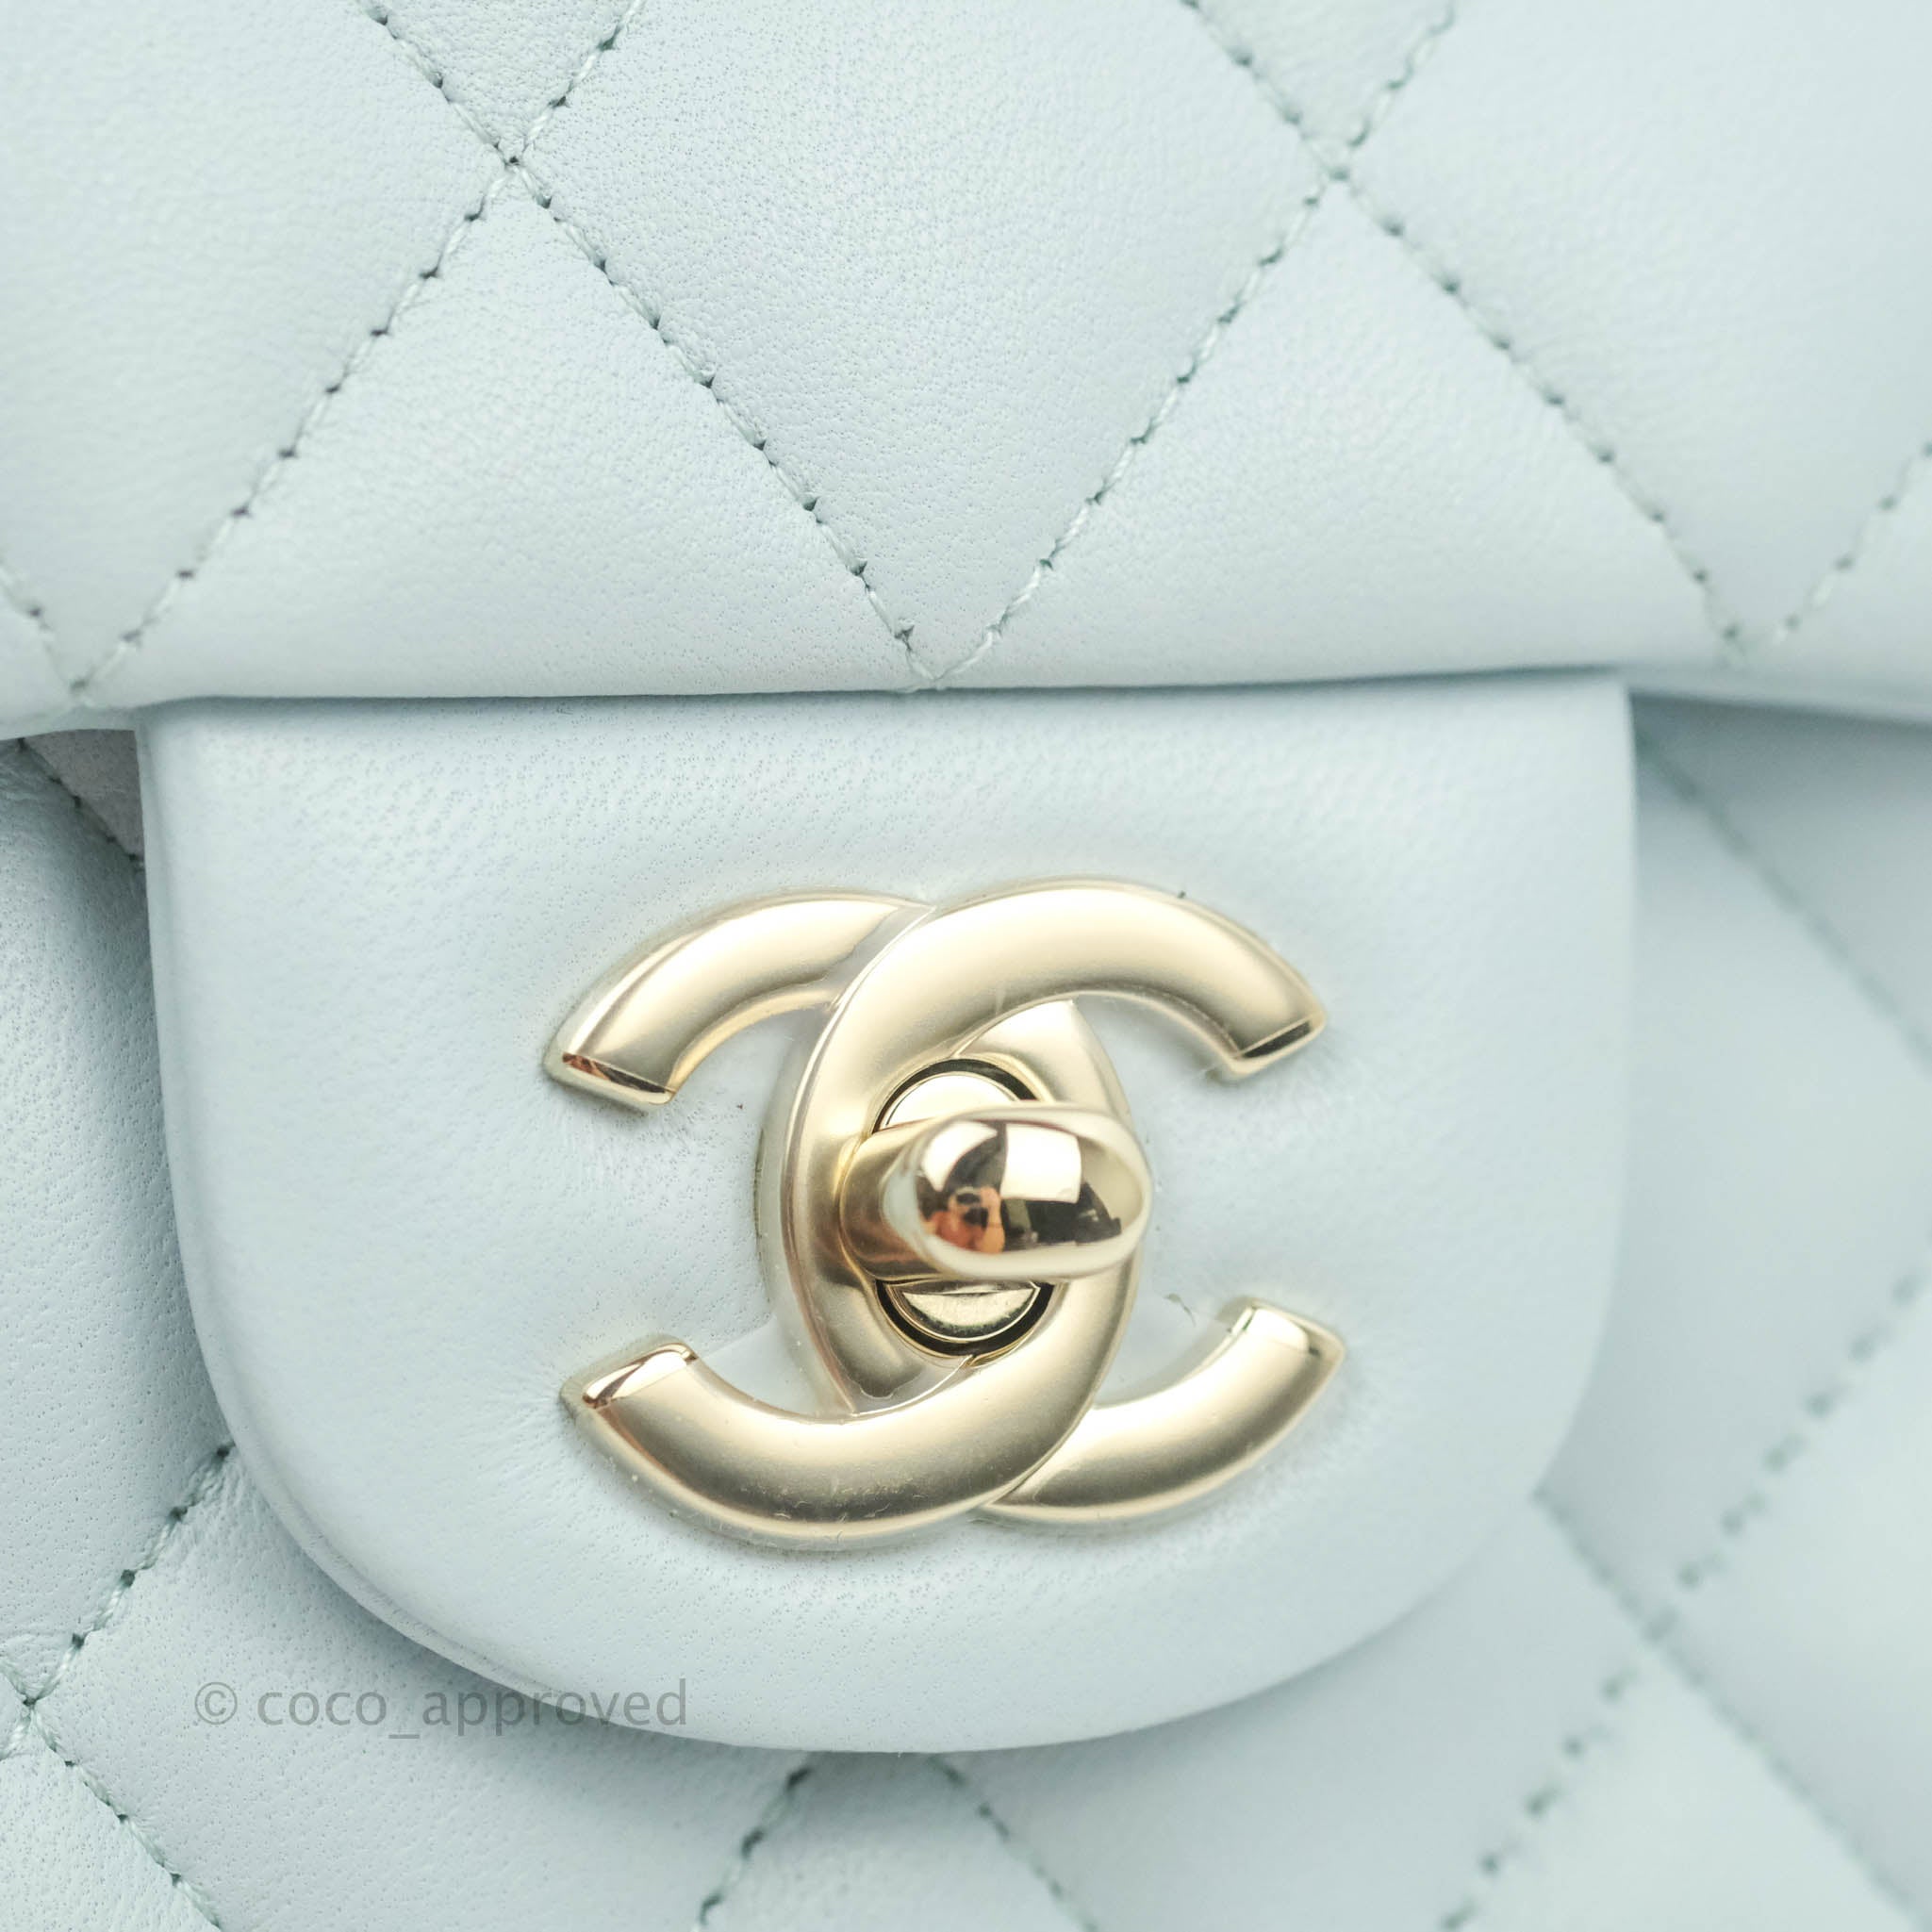 Chanel Quilted Mini Rectangular Flap Iridescent Blue Green Aged